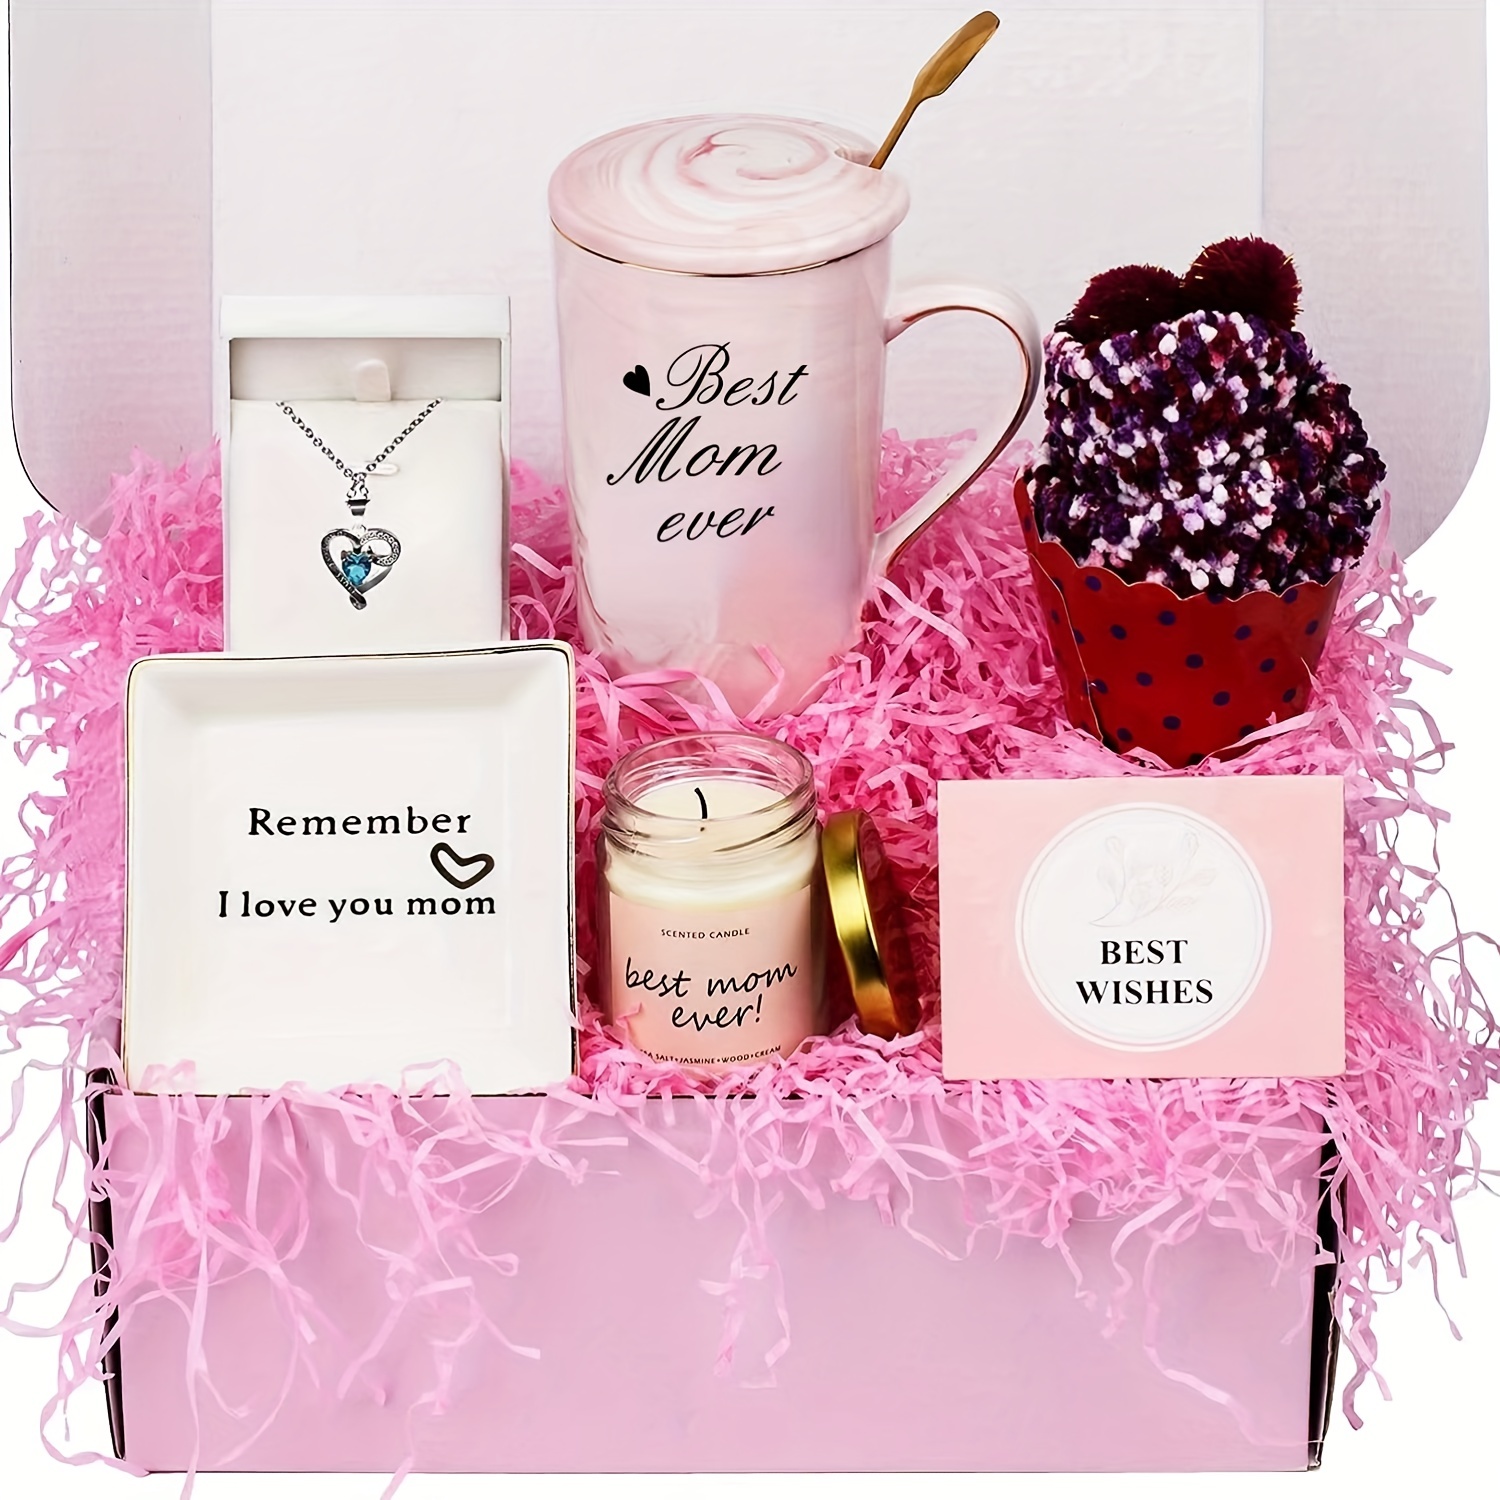 Best Mom Ever Candle, Birthday Gift for Mom